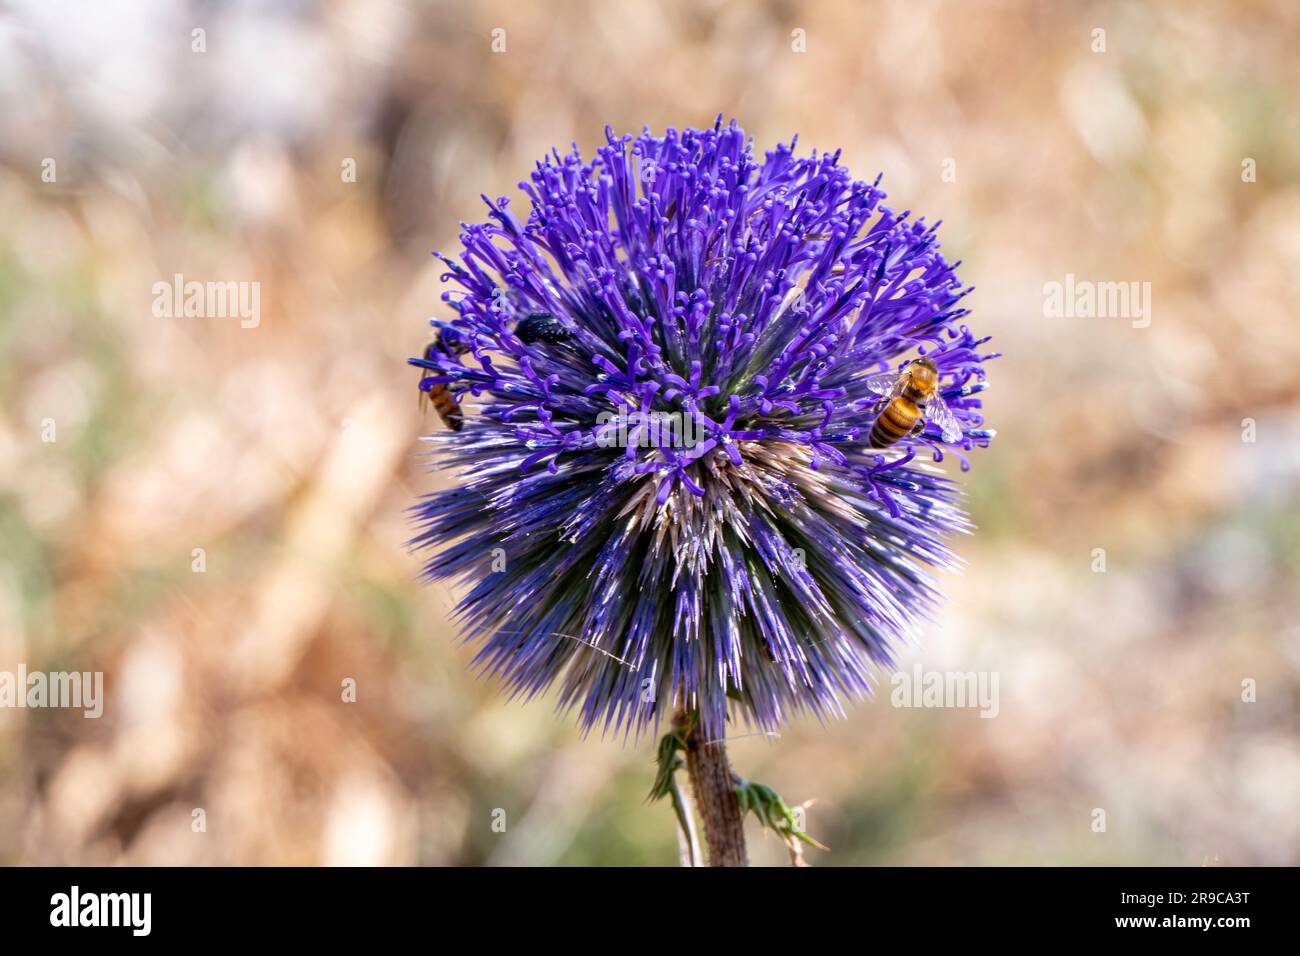 Violet Flower of echinops bannaticus blue globe thistle a member of the sunflower family. Selective focus. Stock Photo